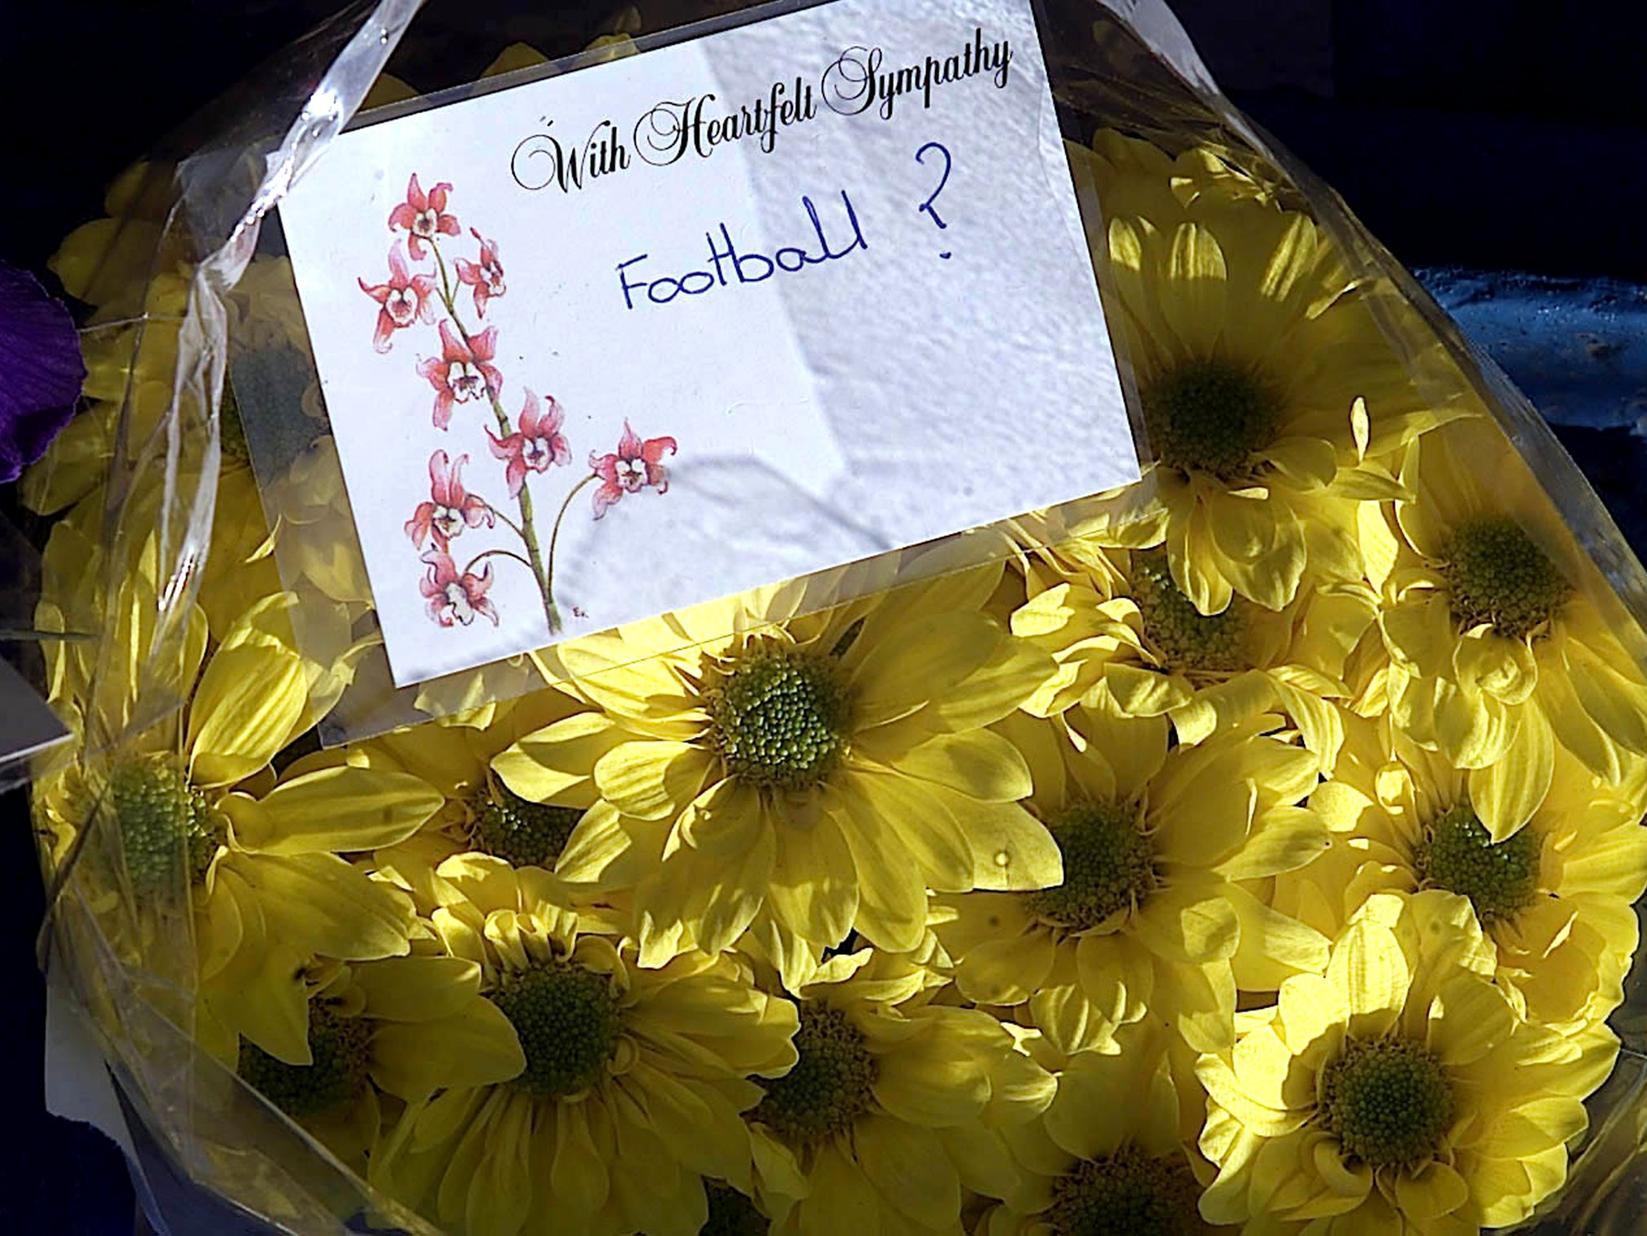 A poignant message on a floral tribute for Kevin Speight and Christopher Loftus the two Leeds United fans killed in Istanbul ahead of their sides UEFA cup match against Galatasaray.